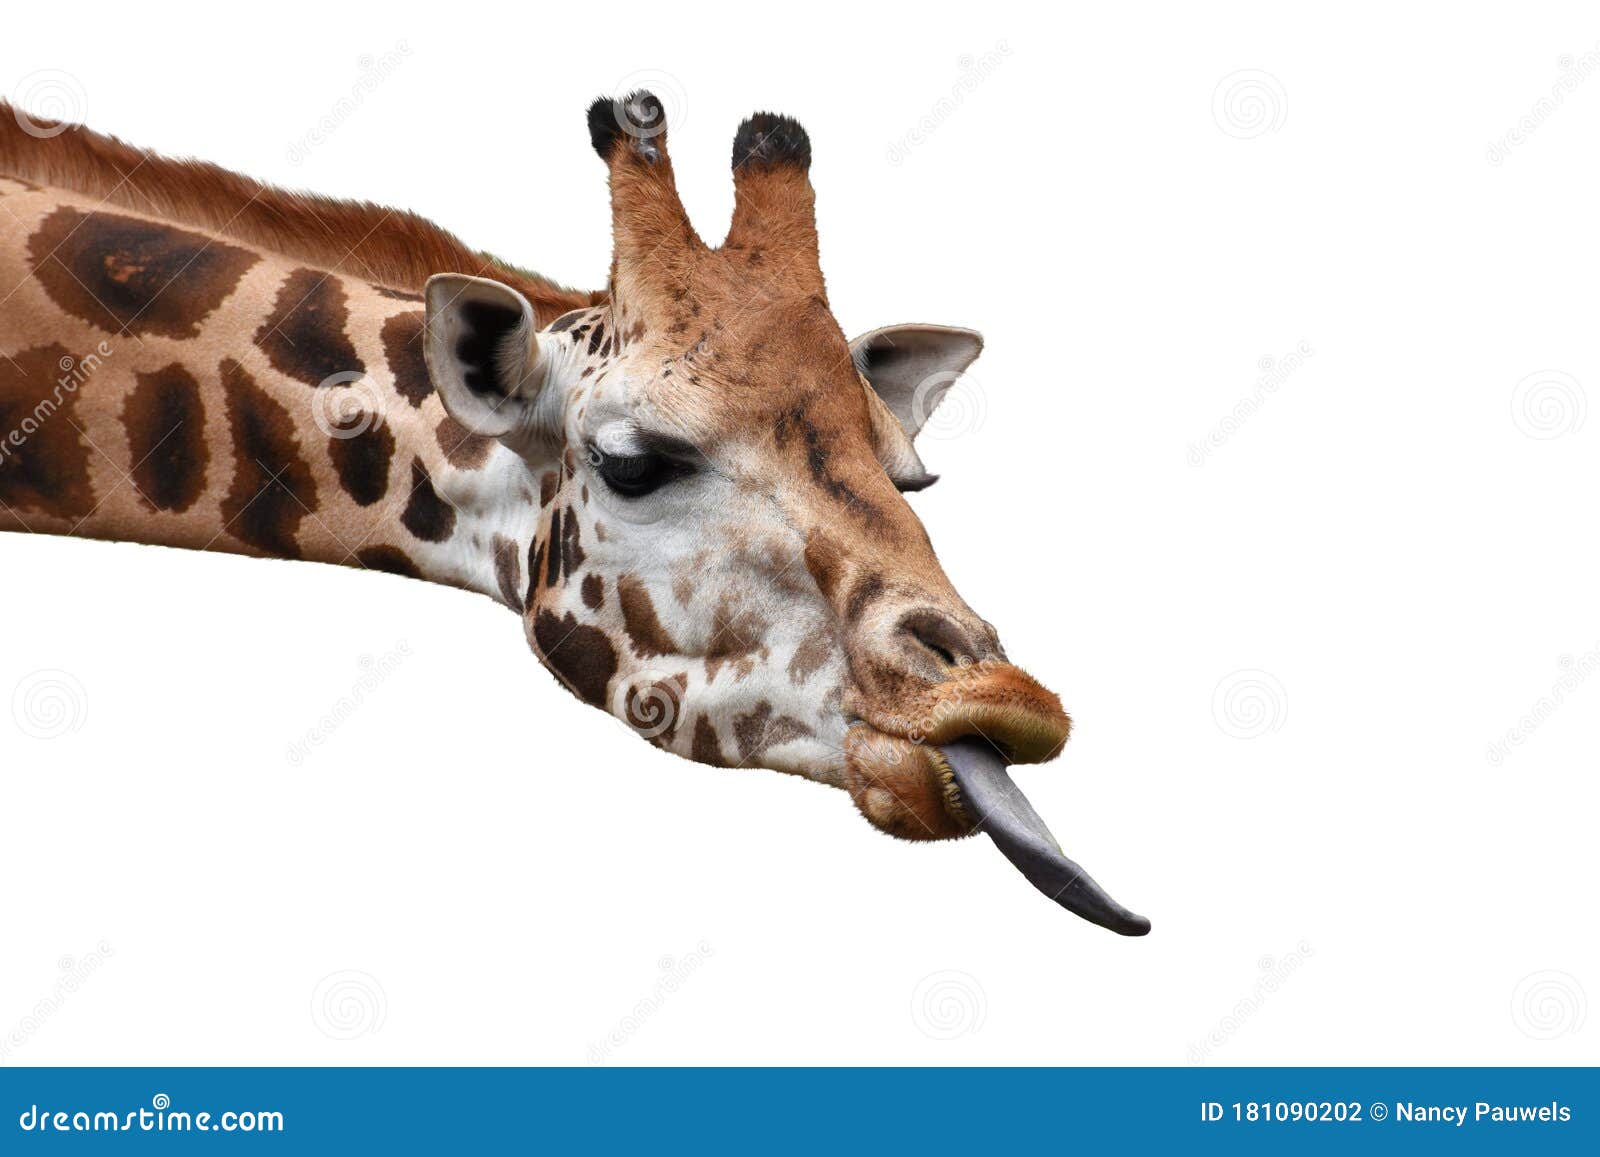 Funny Giraffe Head with Long Tongue Isolated on White Background. Stock